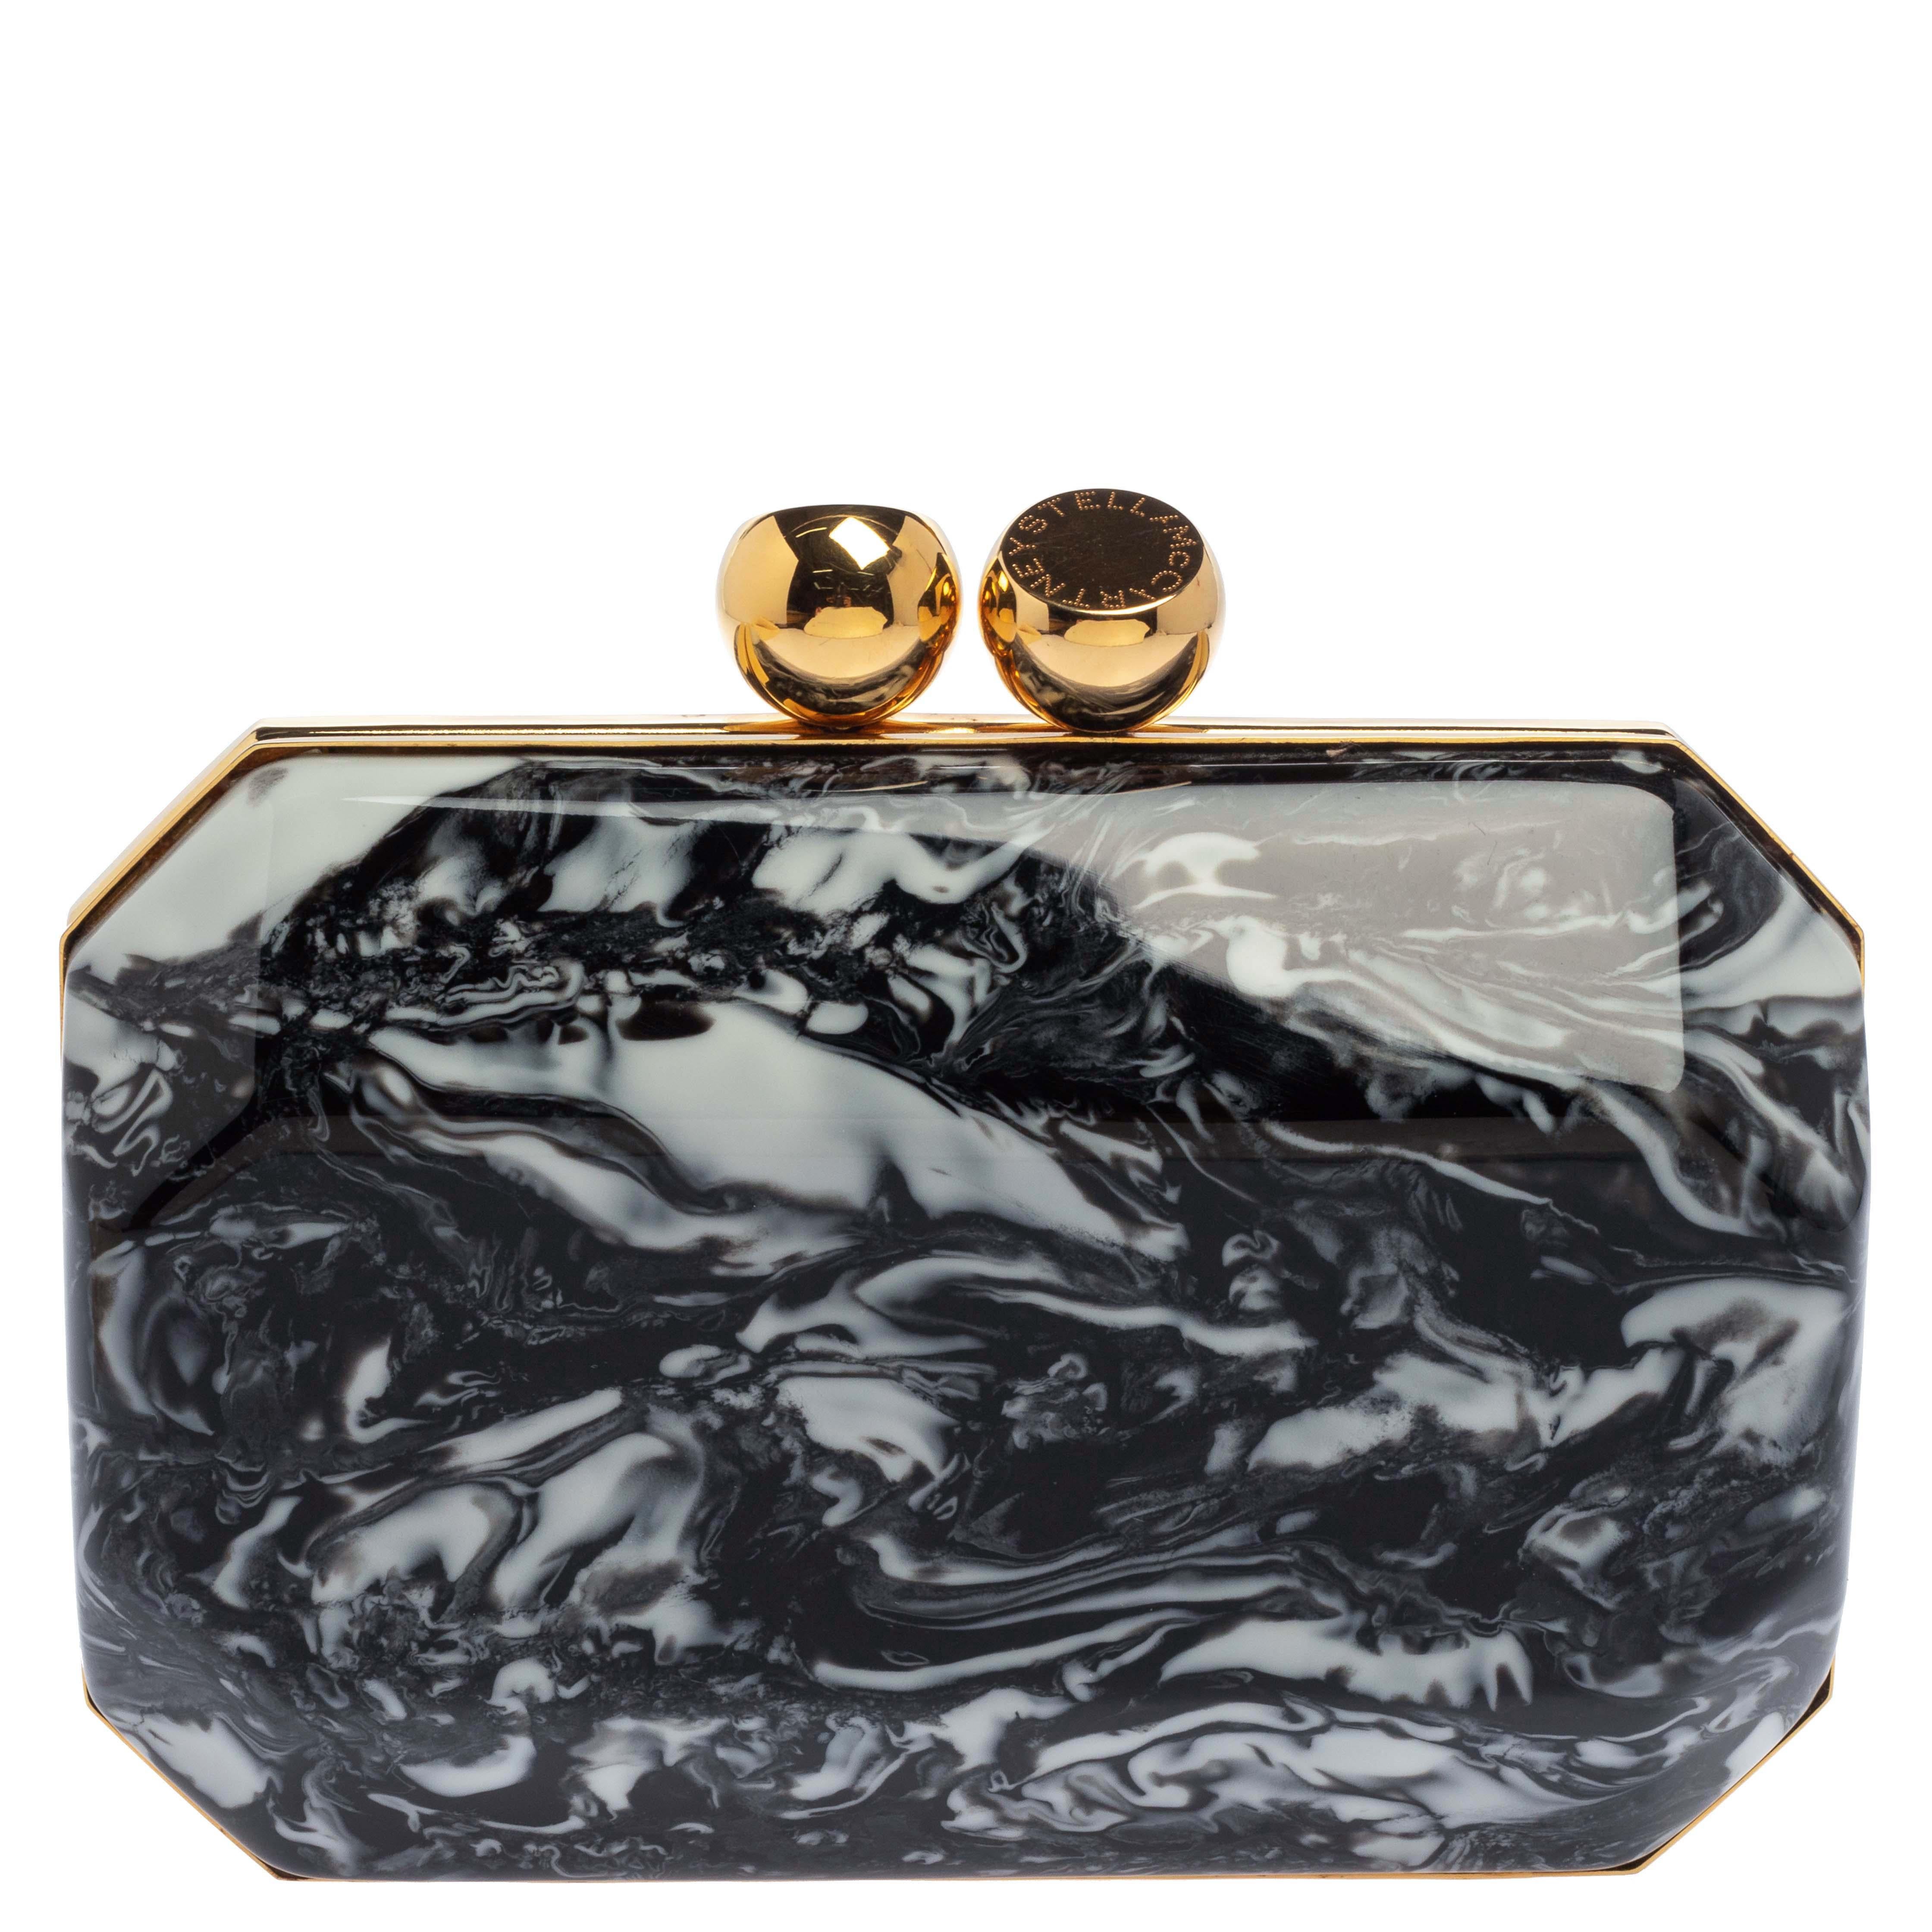 Fierce, funky, and eye-catching, this Stella McCartney Lucia clutch is perfect for a fun night out. Its stylish plexiglass exterior is adorned in black and white hues and is designed in an unusual geometric shape with gold-tone outlines and kiss